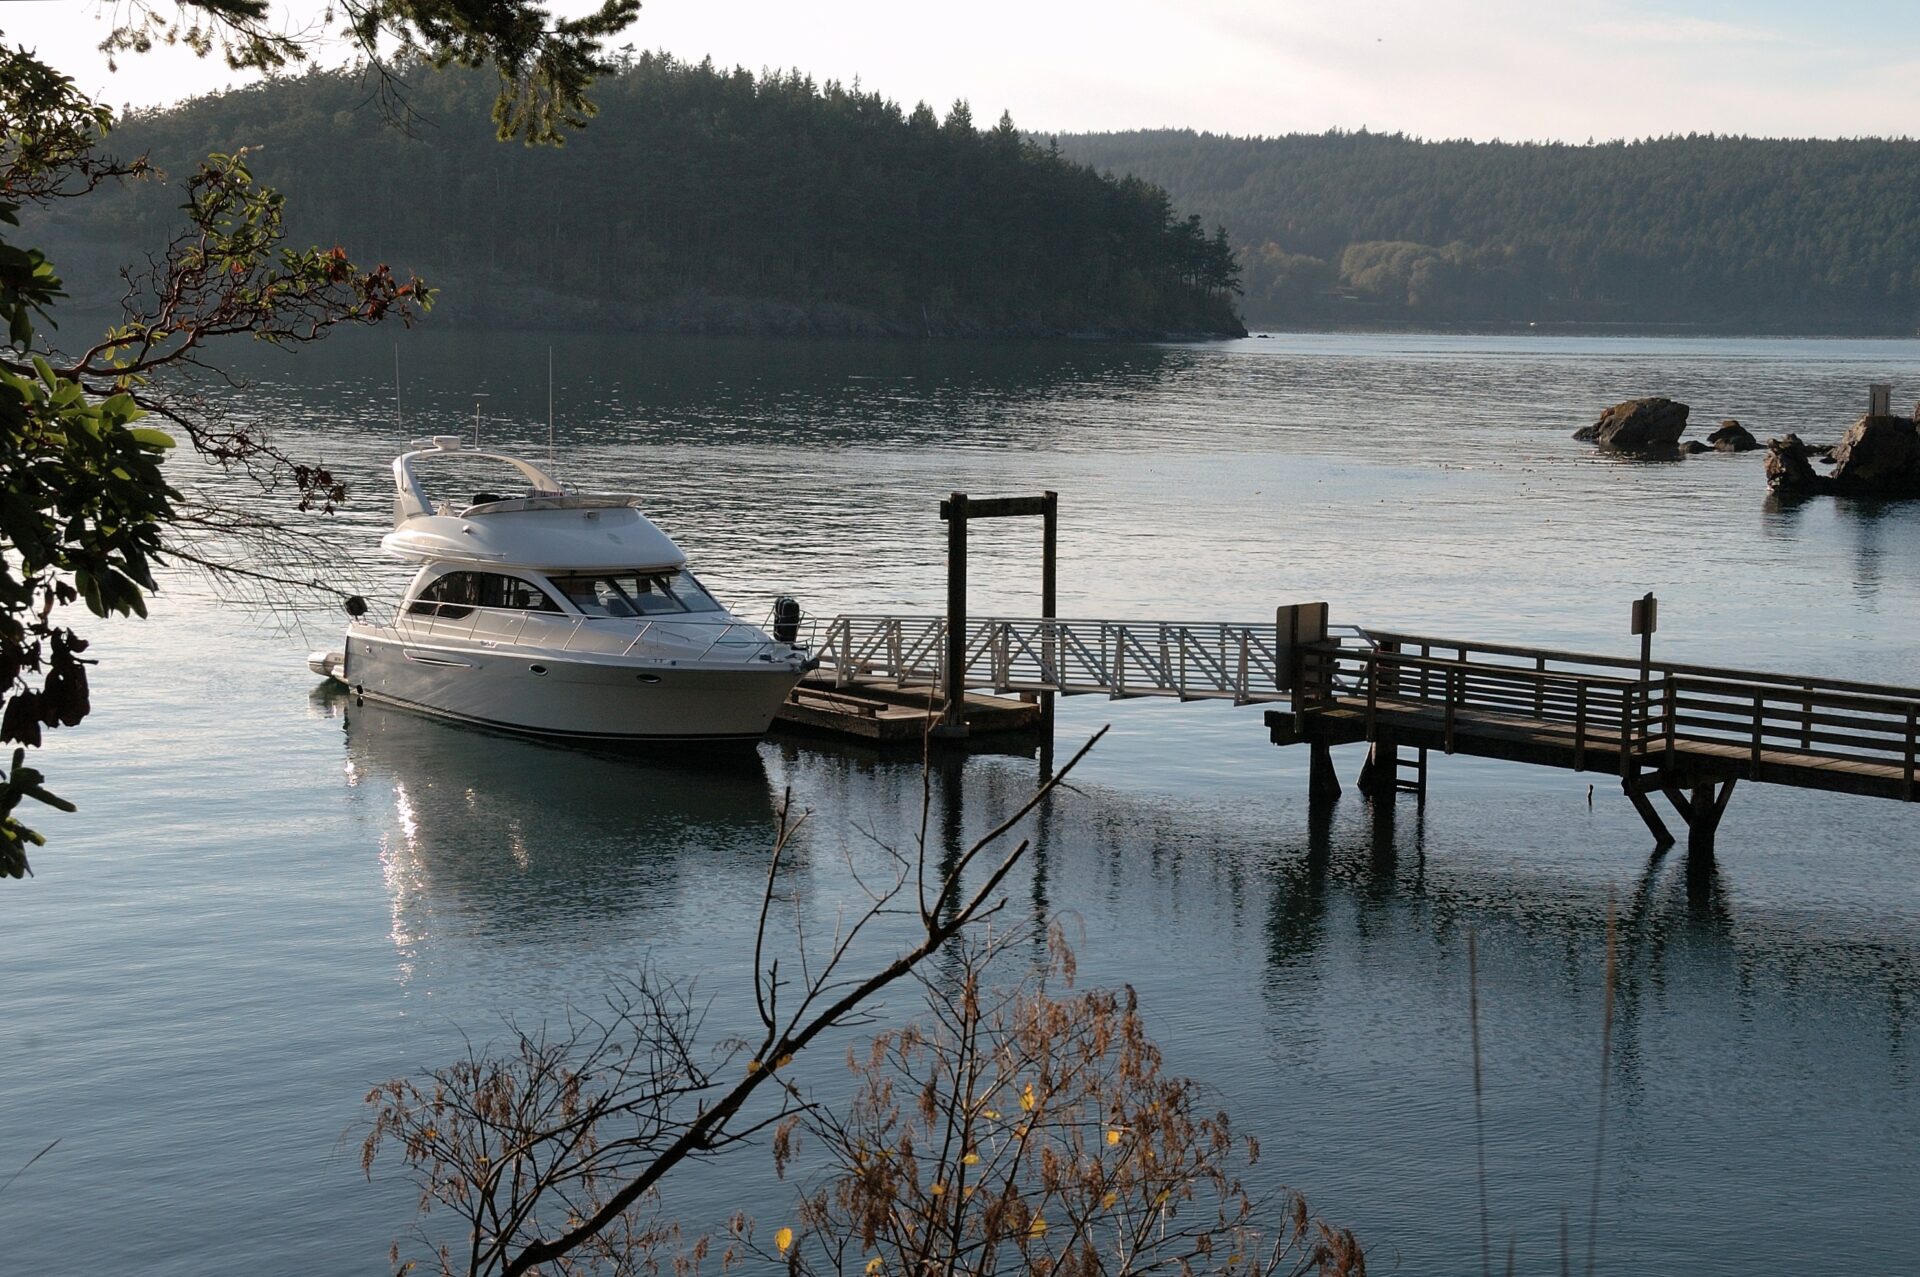 Winter cruising, only boat at dock